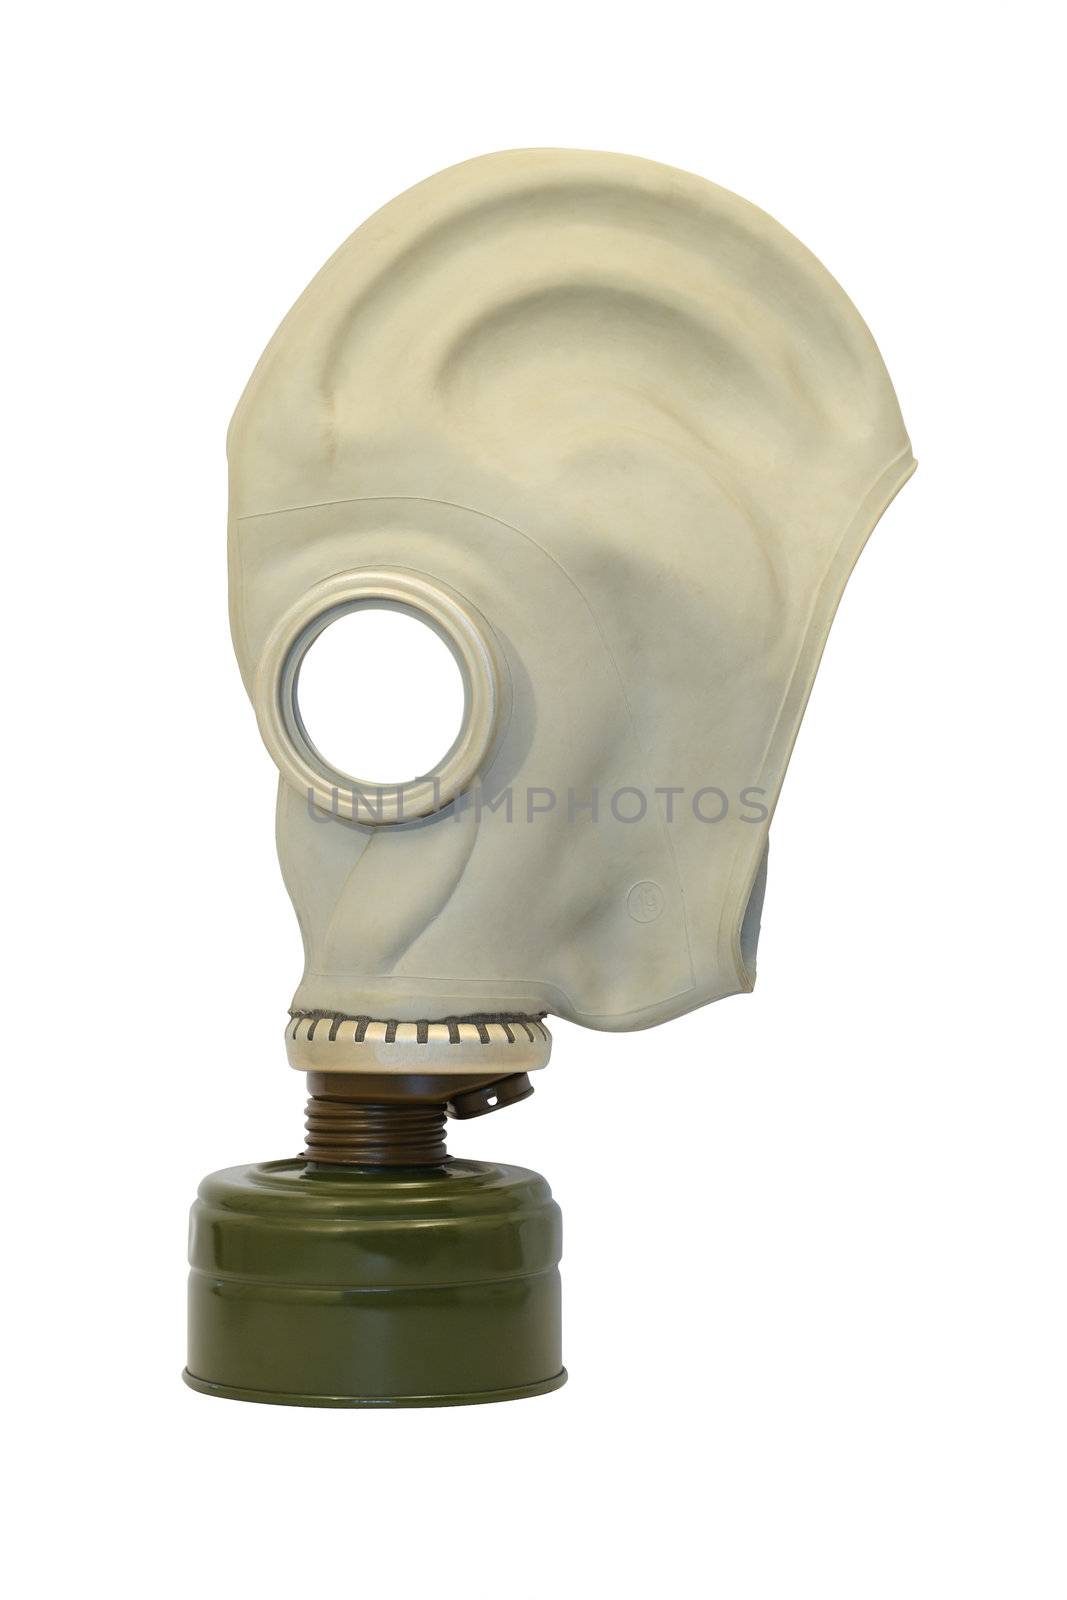 Old Gas Mask isolated on white background with clipping path